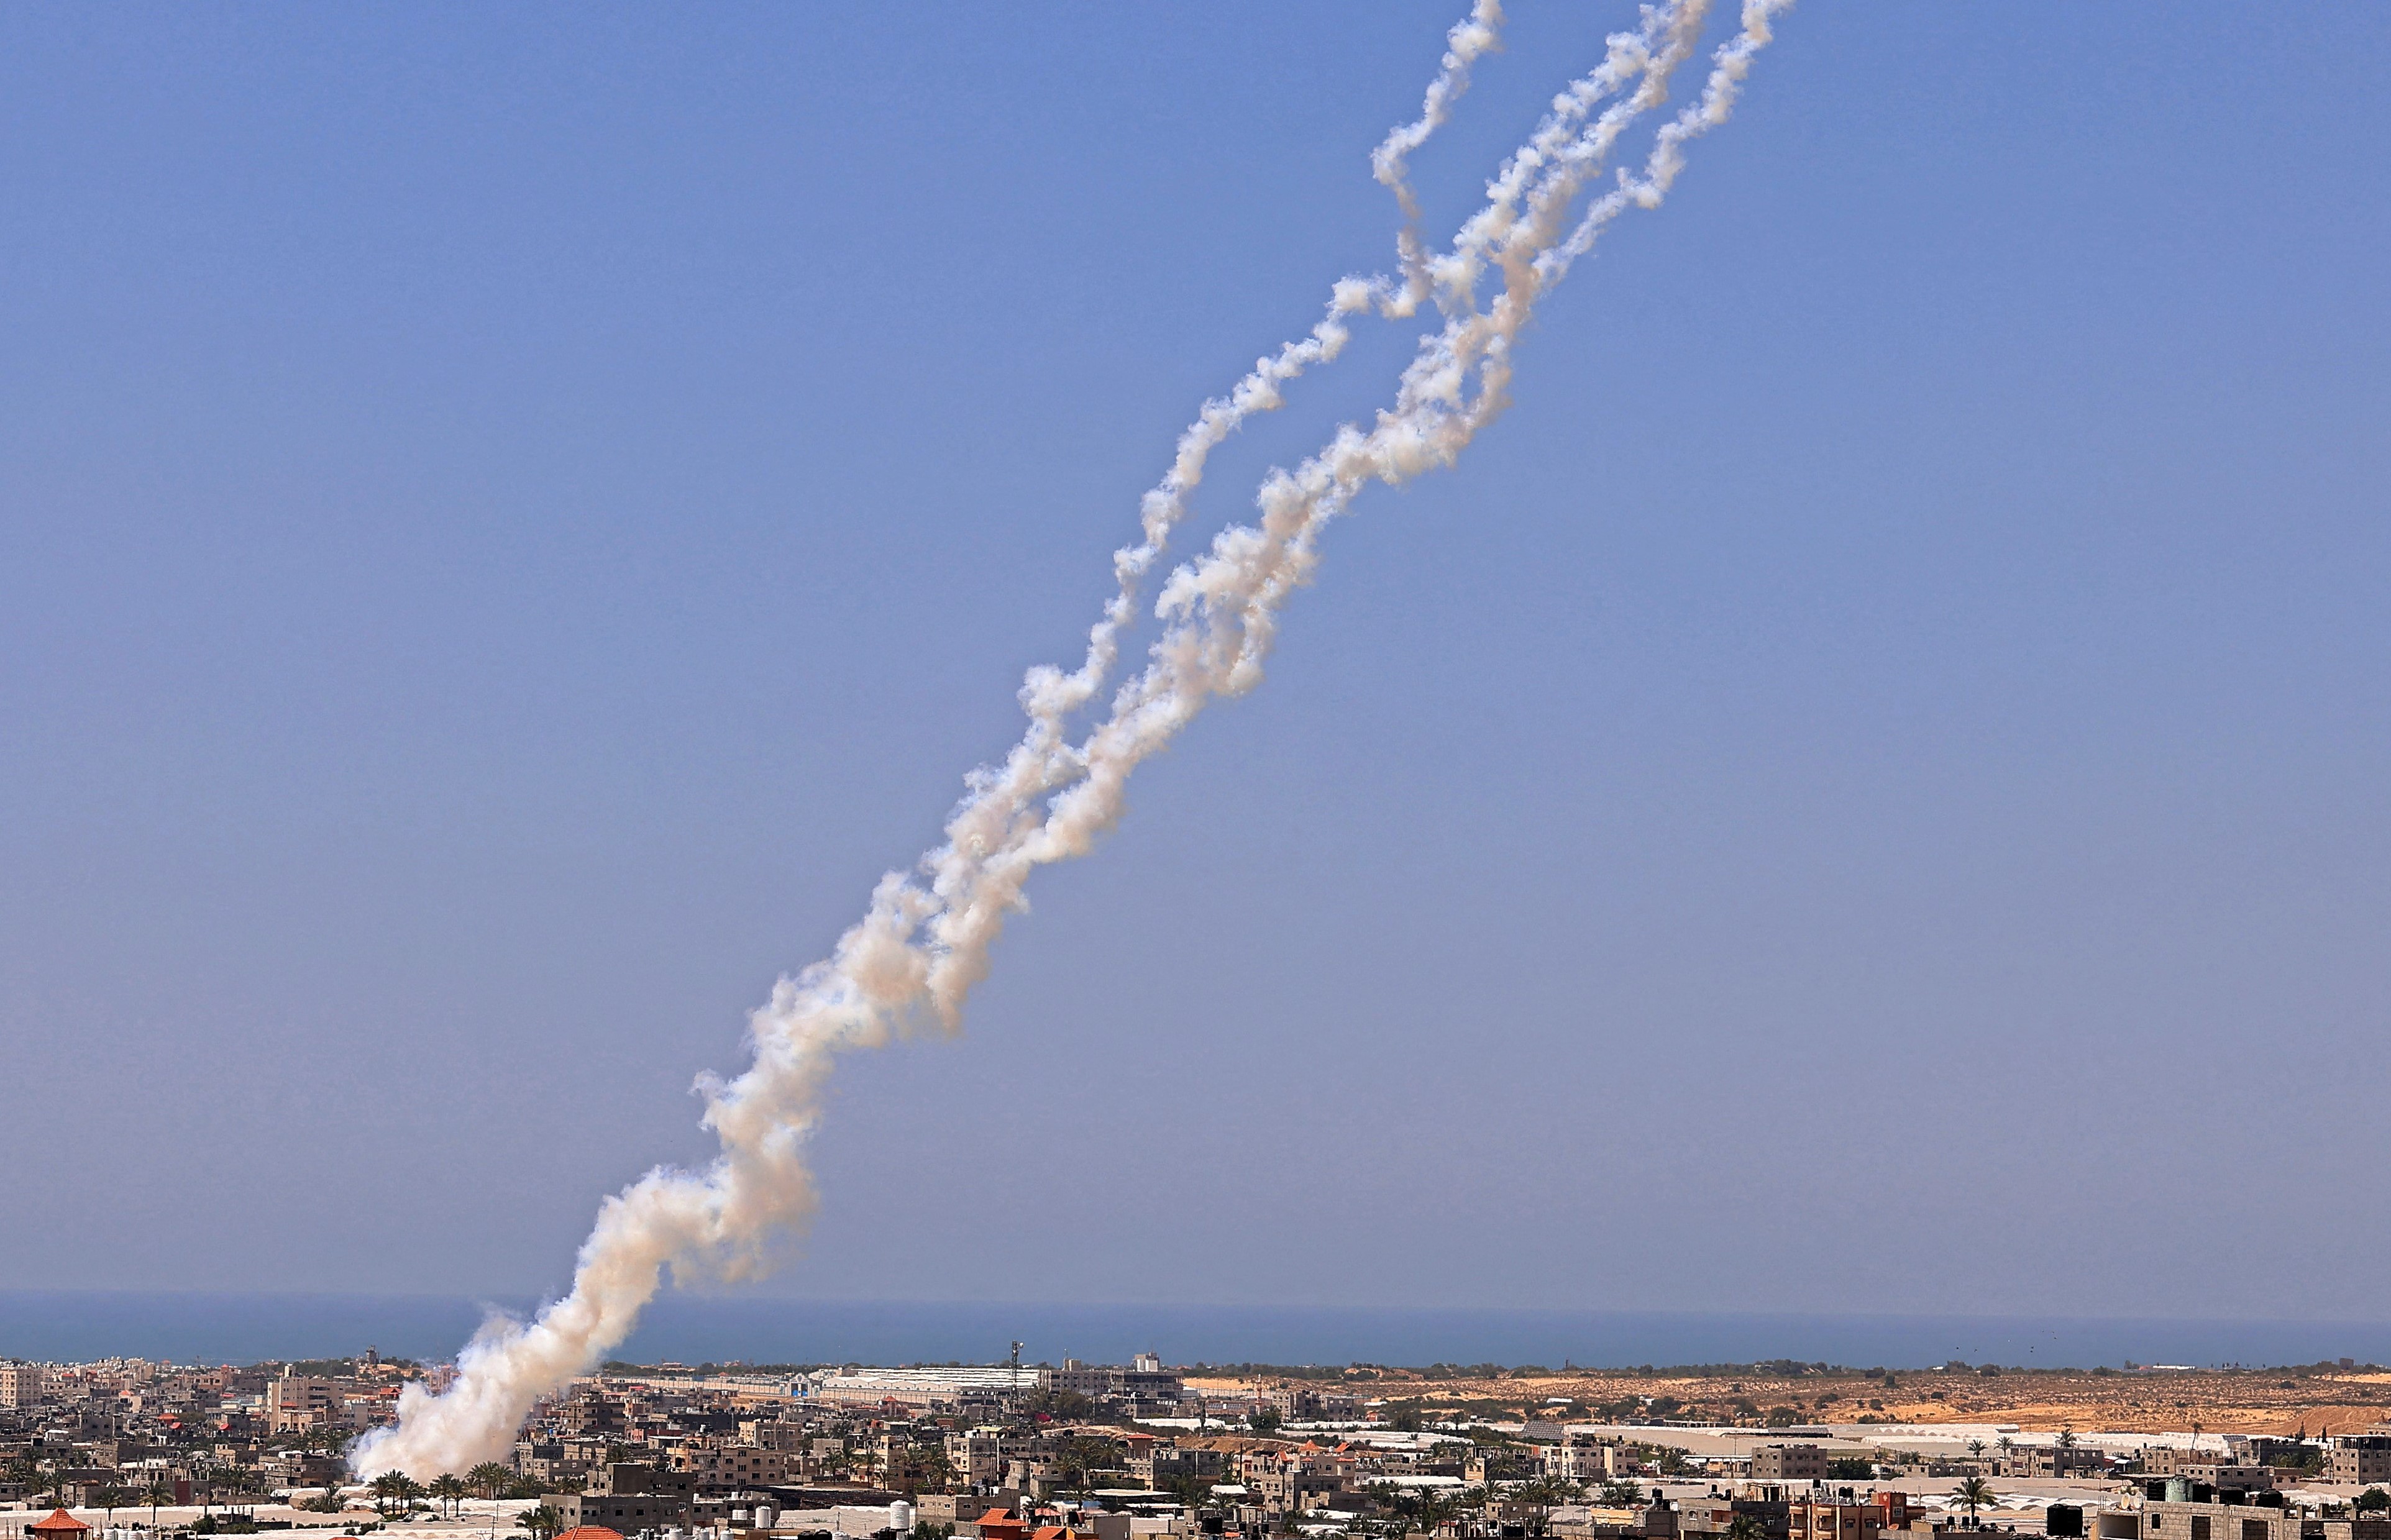 Rockets are launched towards Israel from Rafah, in the south of the Gaza Strip, controlled by the Palestinian Hamas movement, on May 12, 202